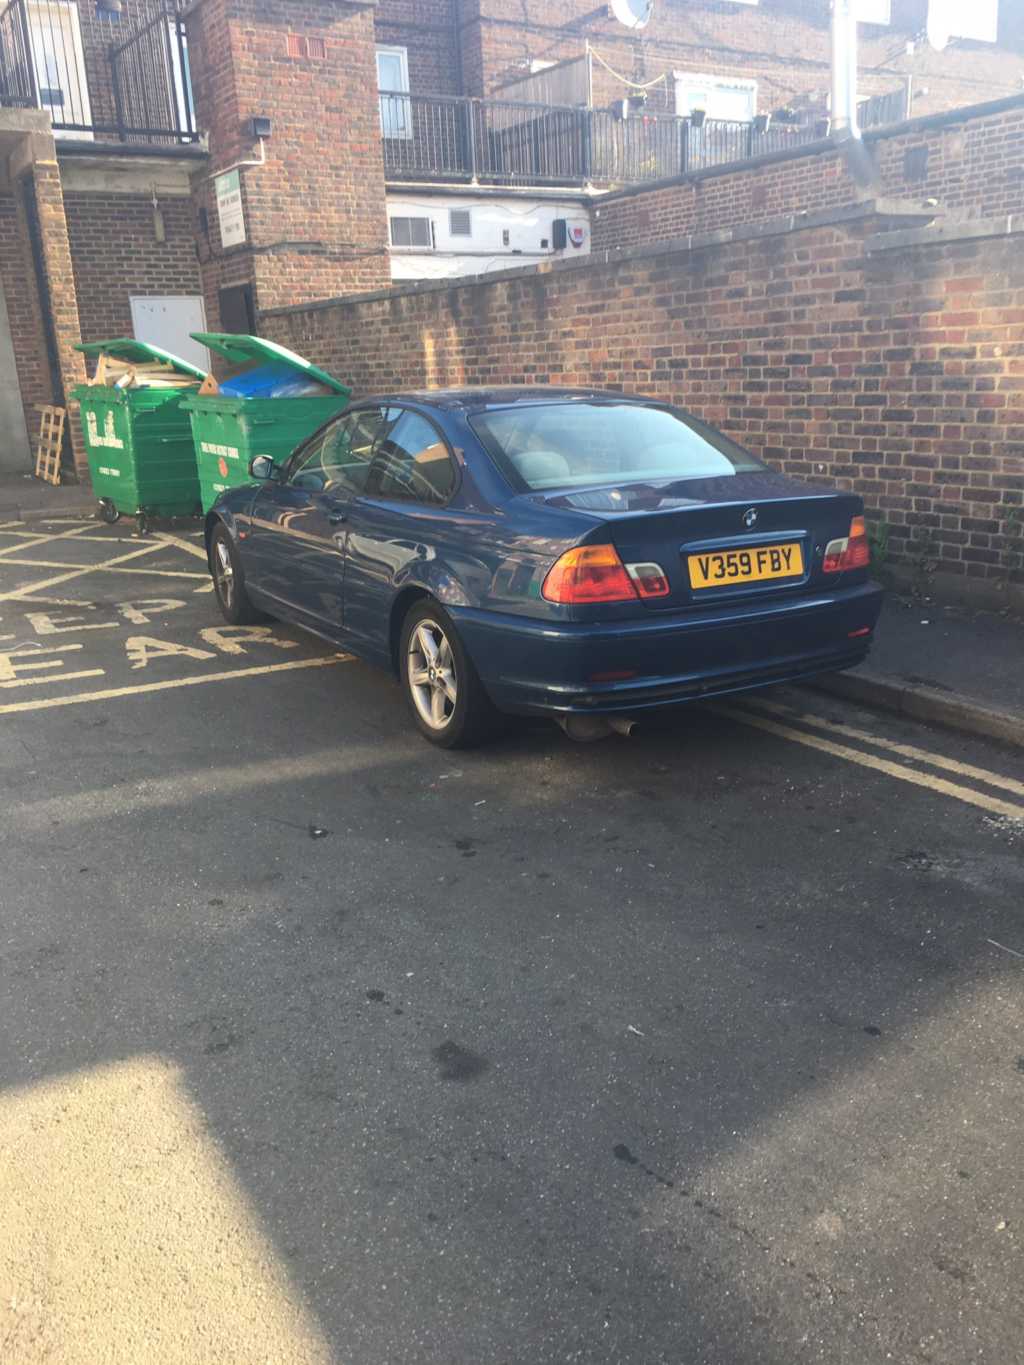 V359 FBY is an Inconsiderate Parker